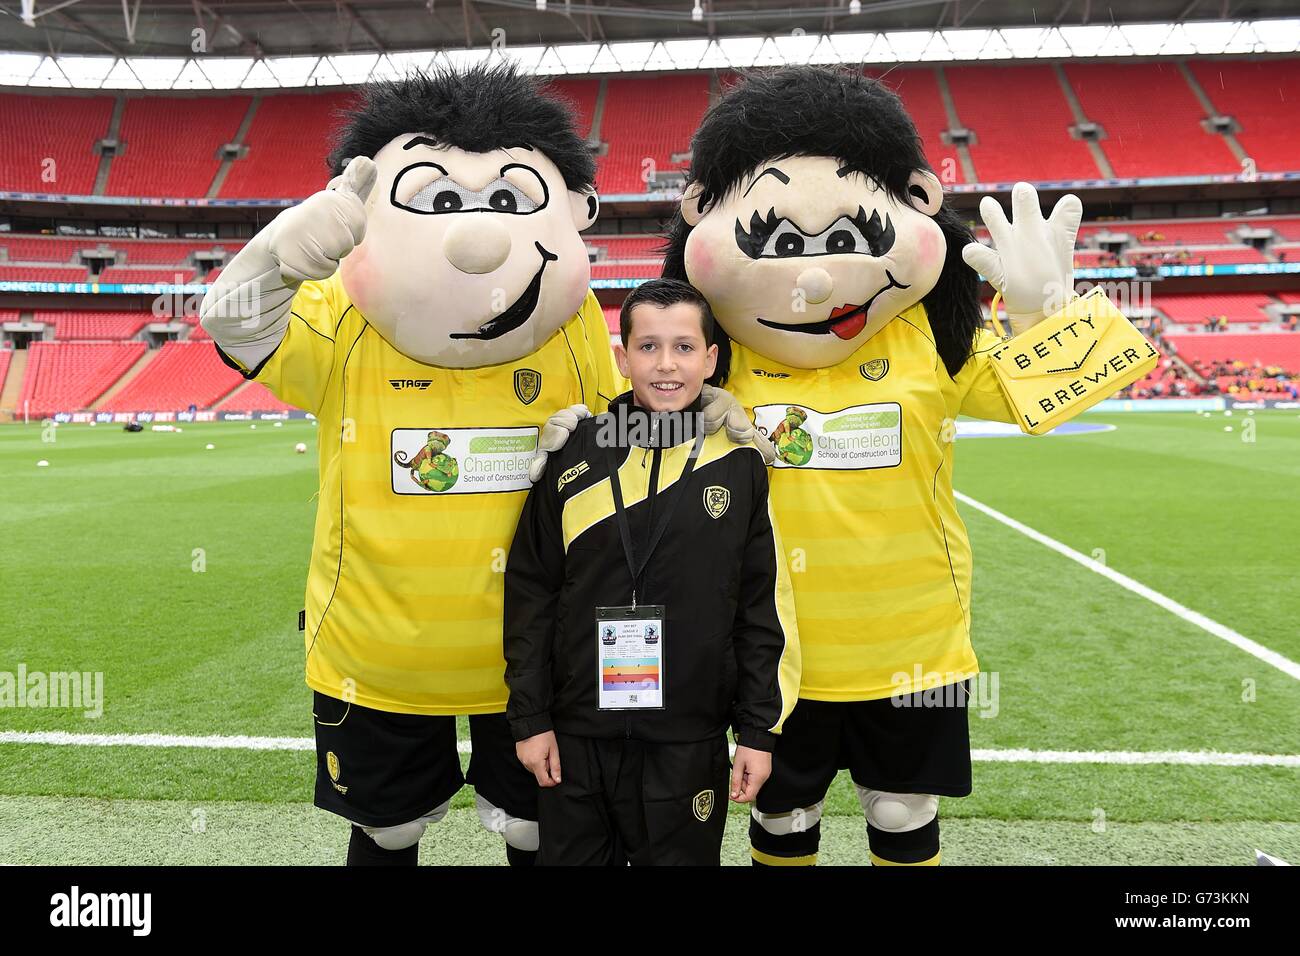 Burton Albion Mascot High Resolution Stock Photography and Images - Alamy